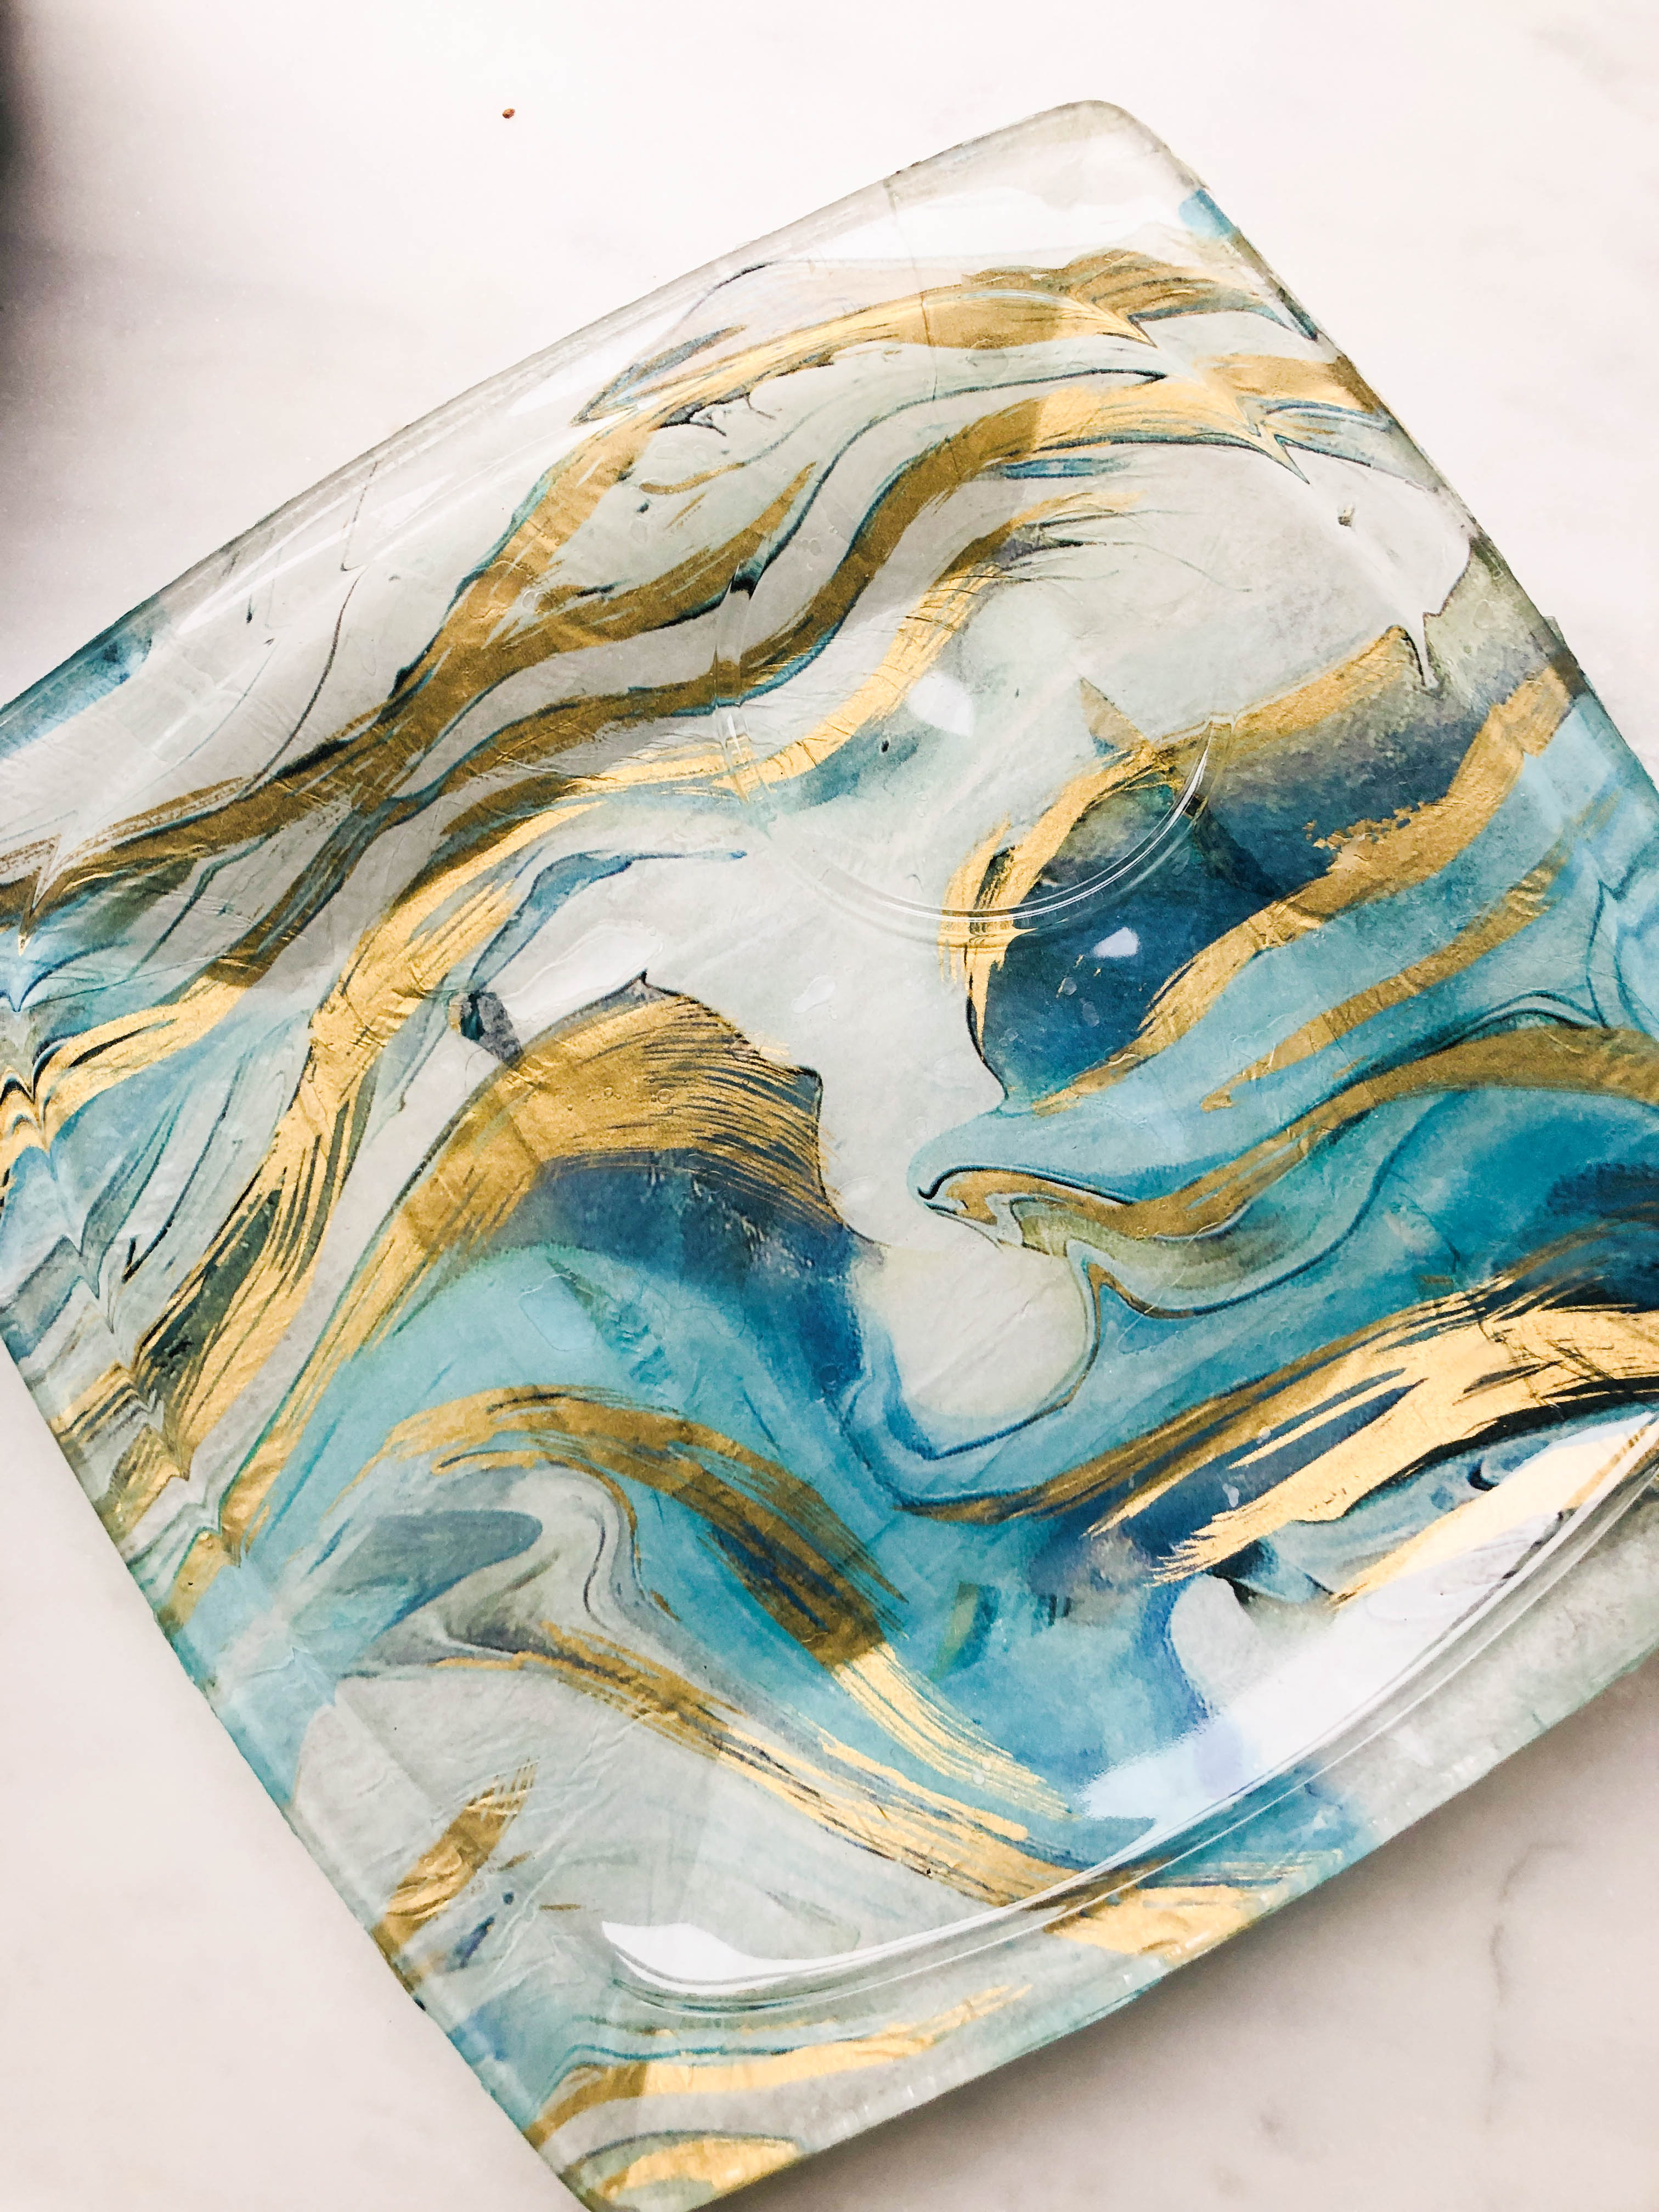 The completed glass snack plate backed with blue and gold tissue paper.